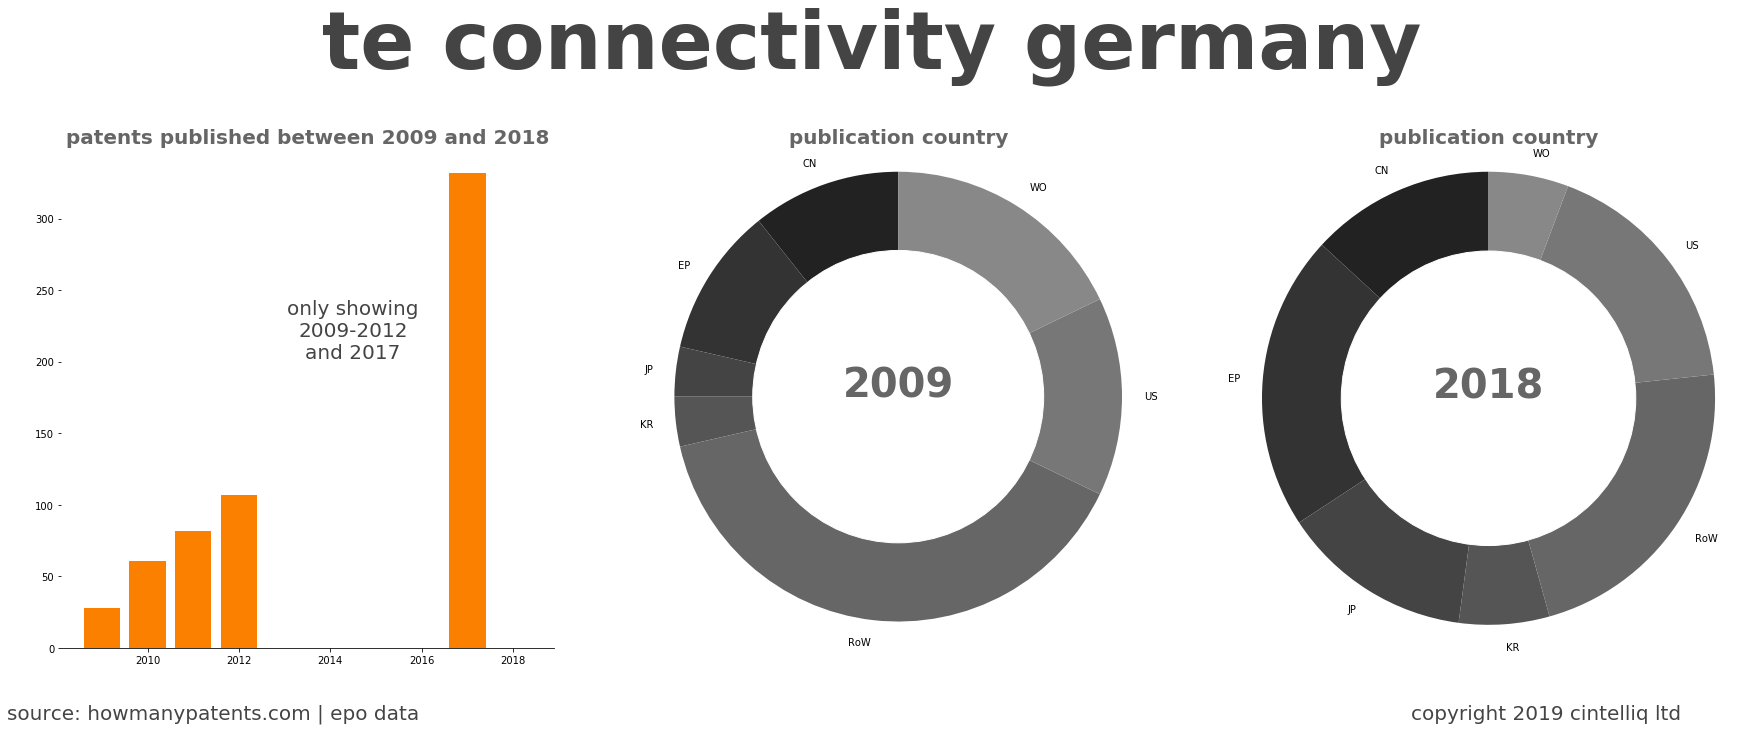 summary of patents for Te Connectivity Germany